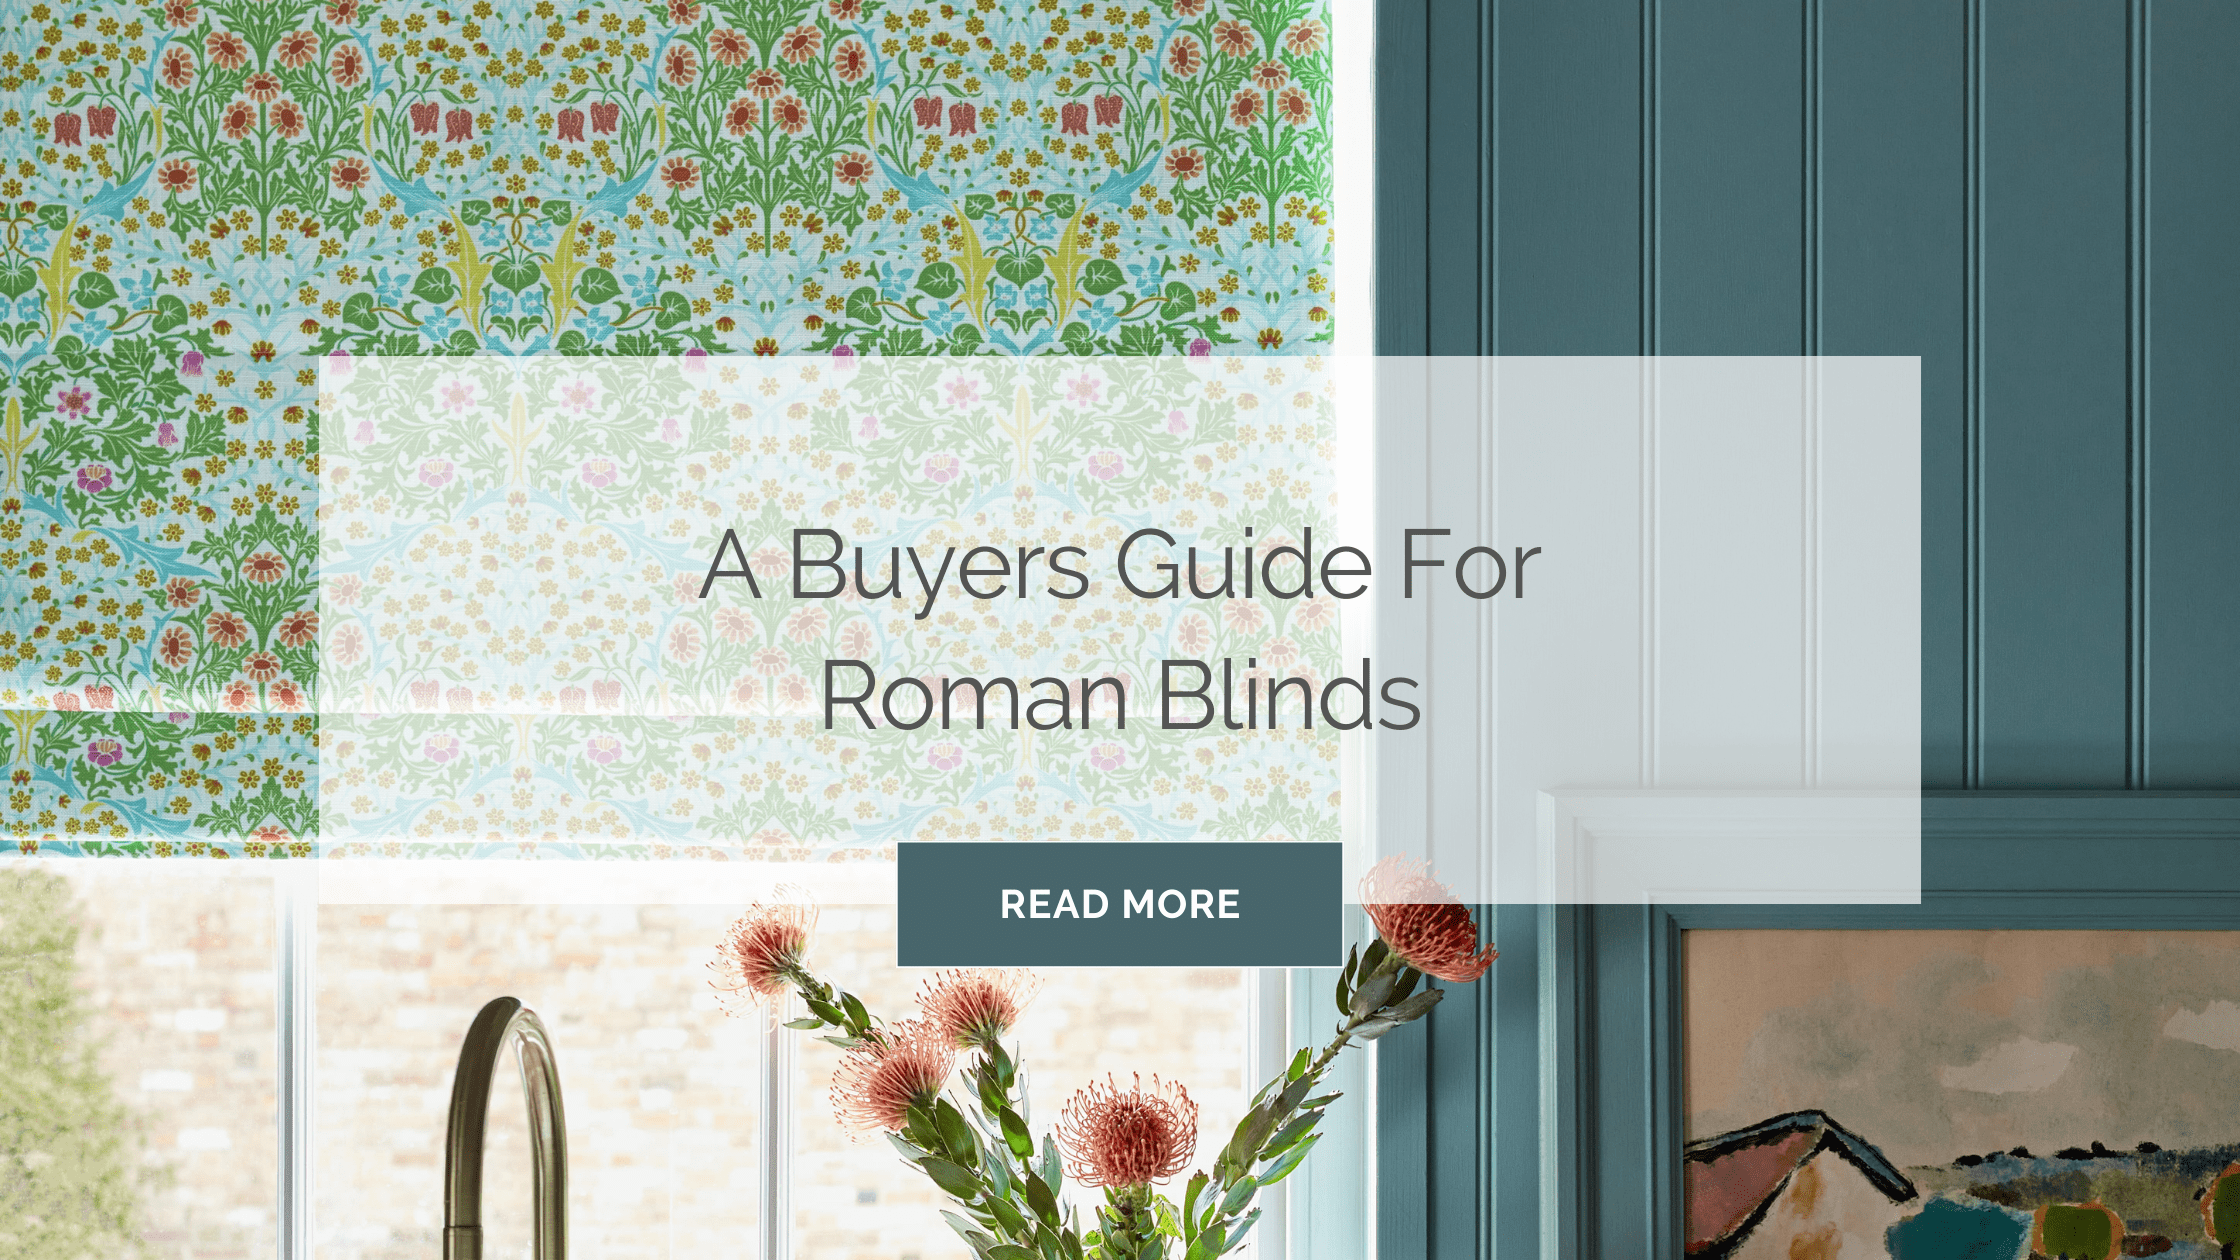 A Buyers Guide for Roman Blinds